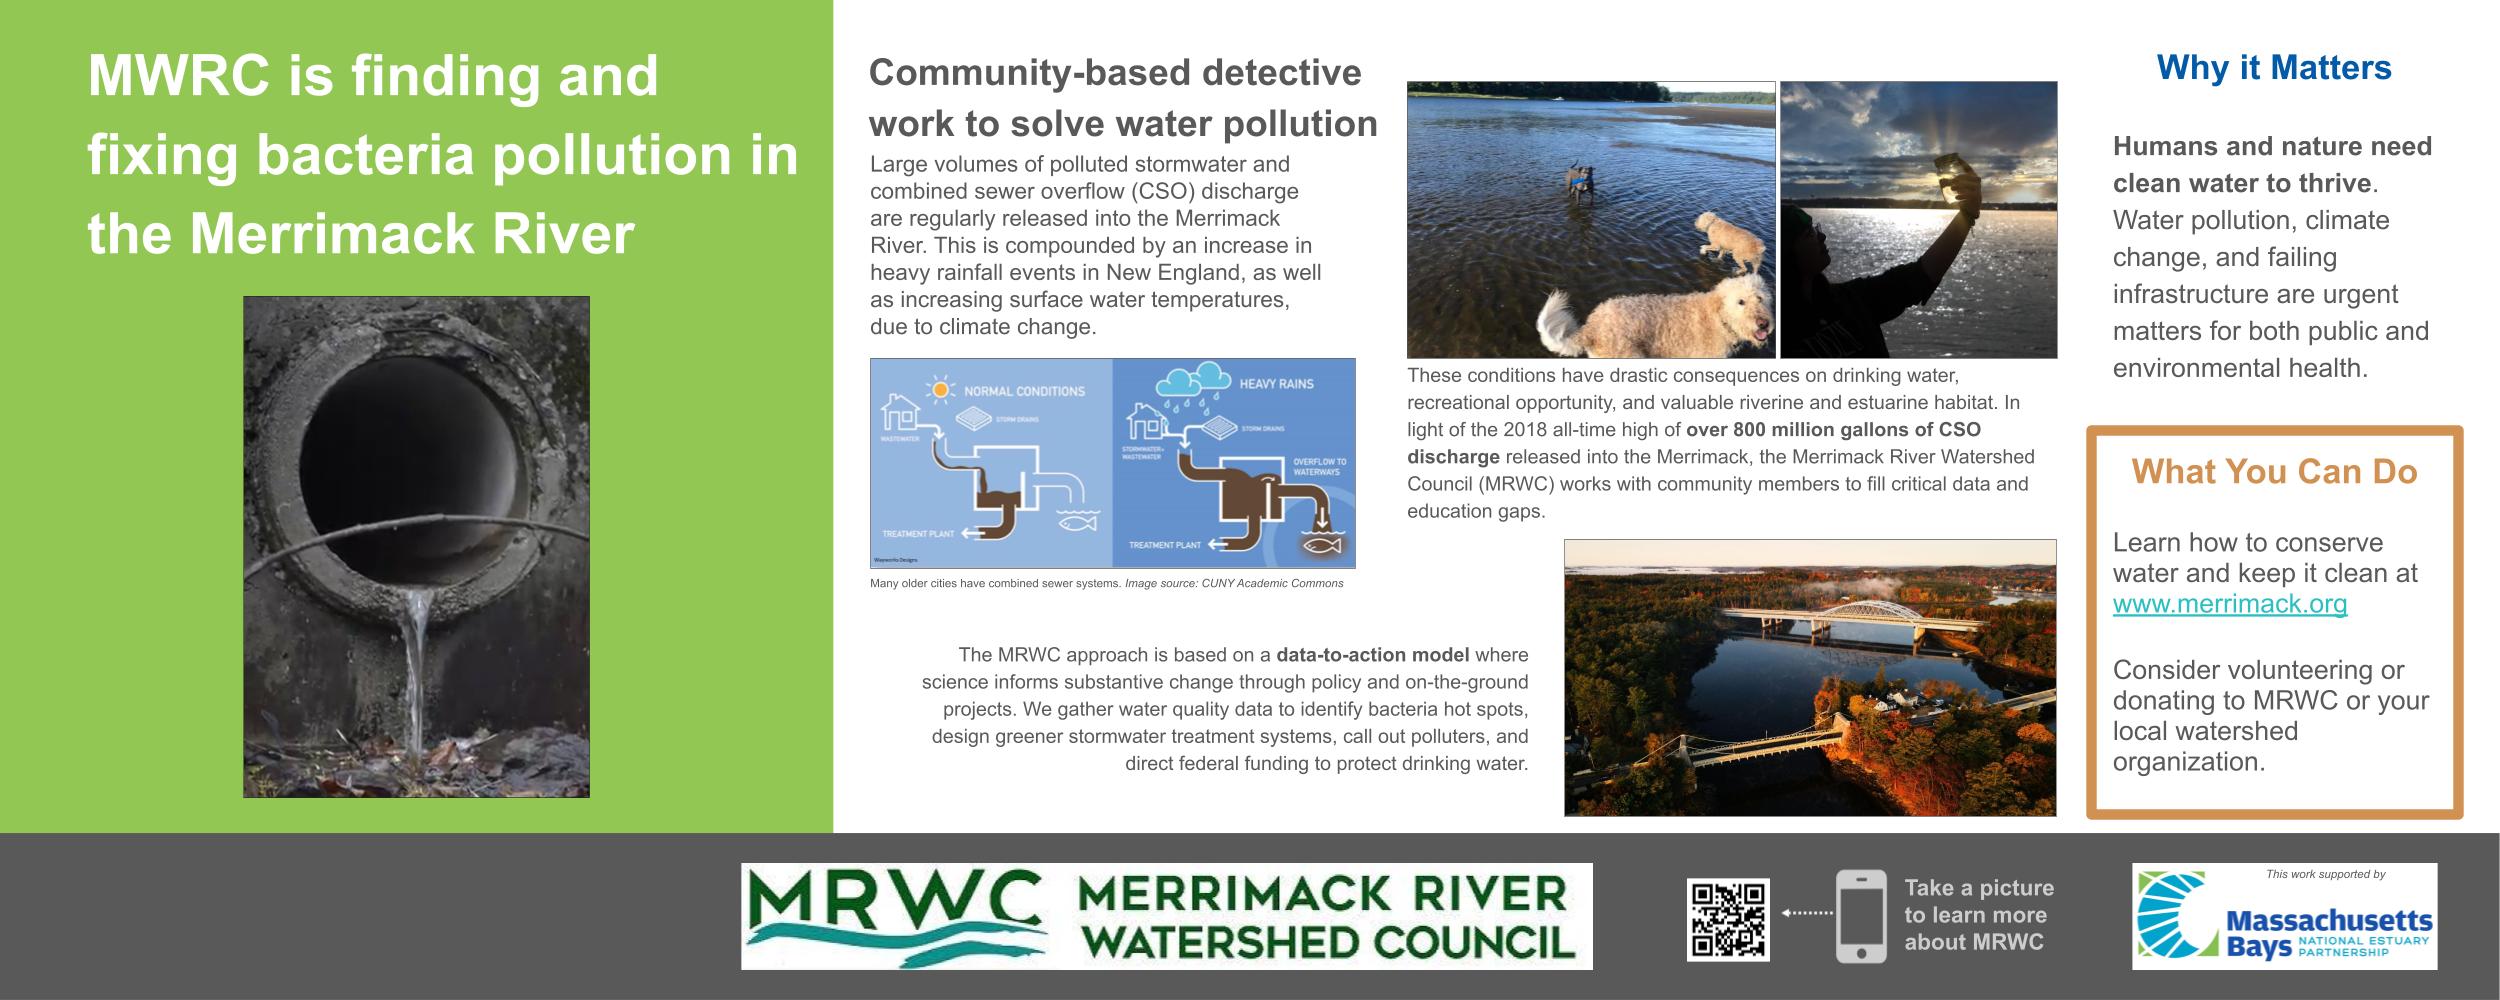 The poster displays a diagram describing combine sewer overflows, and the uses of the river: a source of drinking water, a place for recreation, and a home for wildlife.